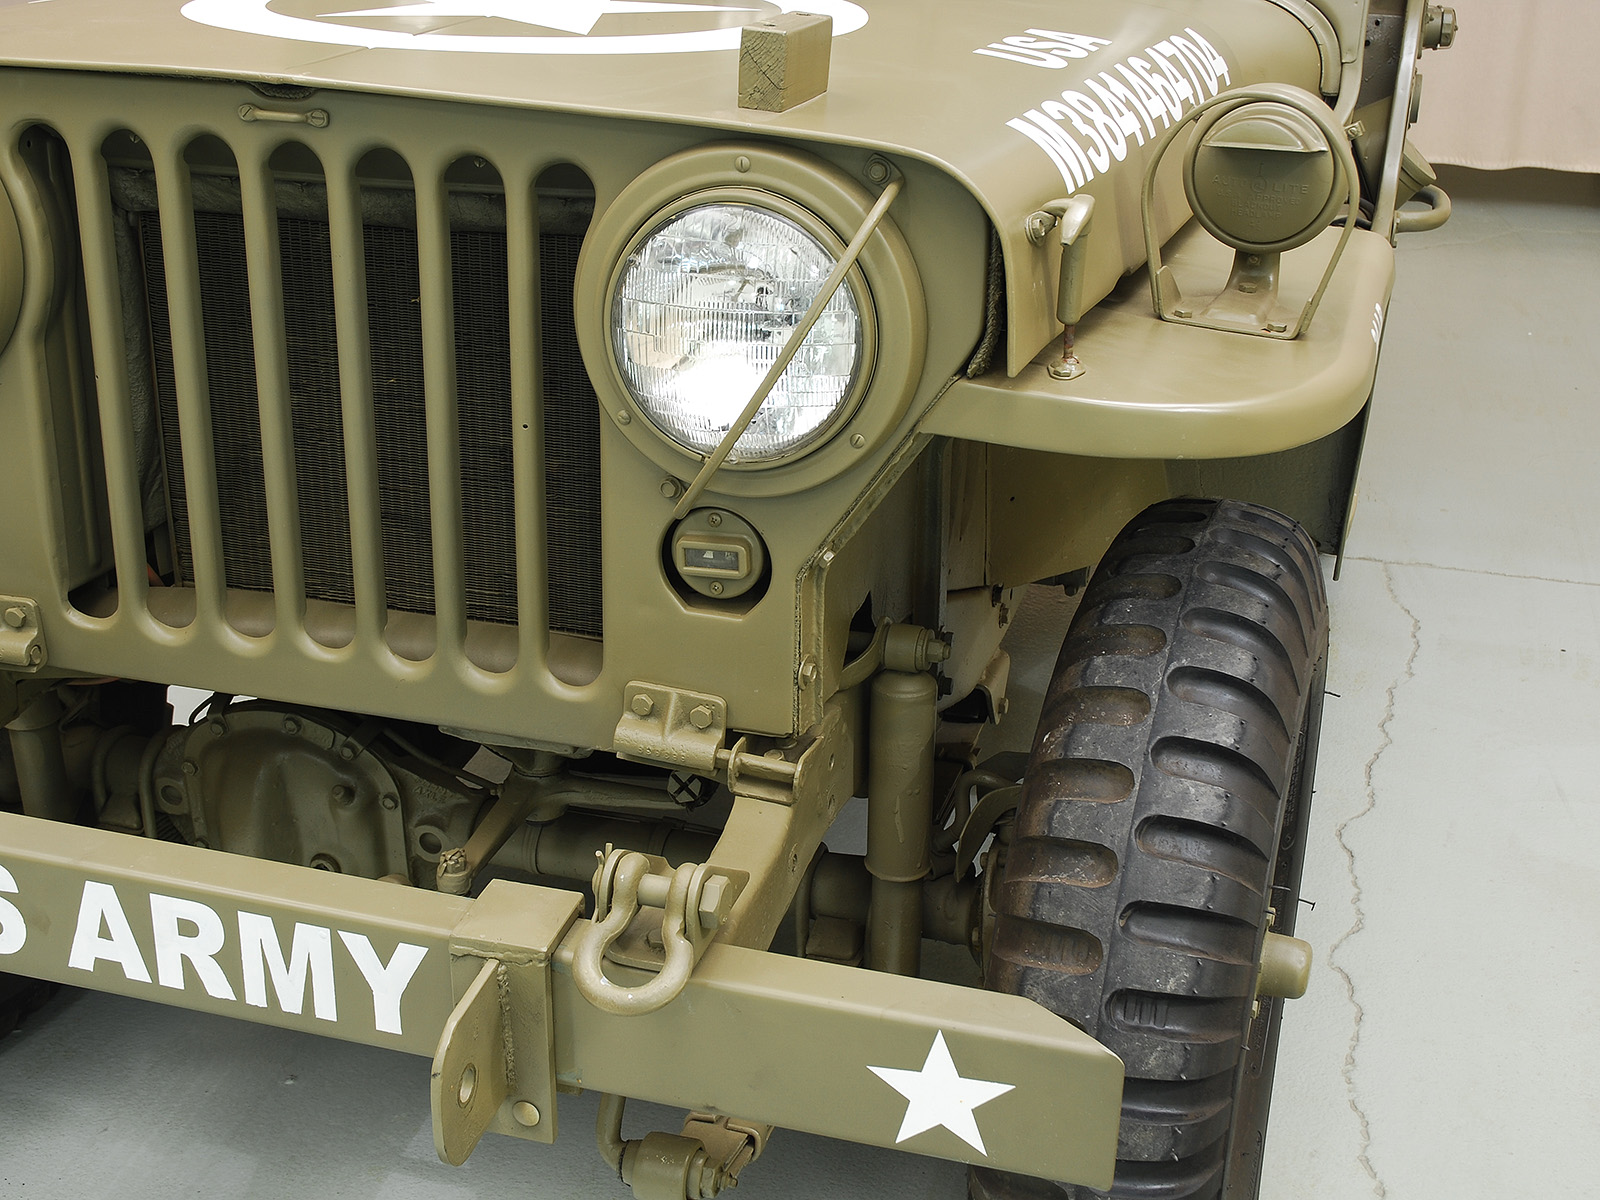 1954 willys-overland m38a1 1/4 ton